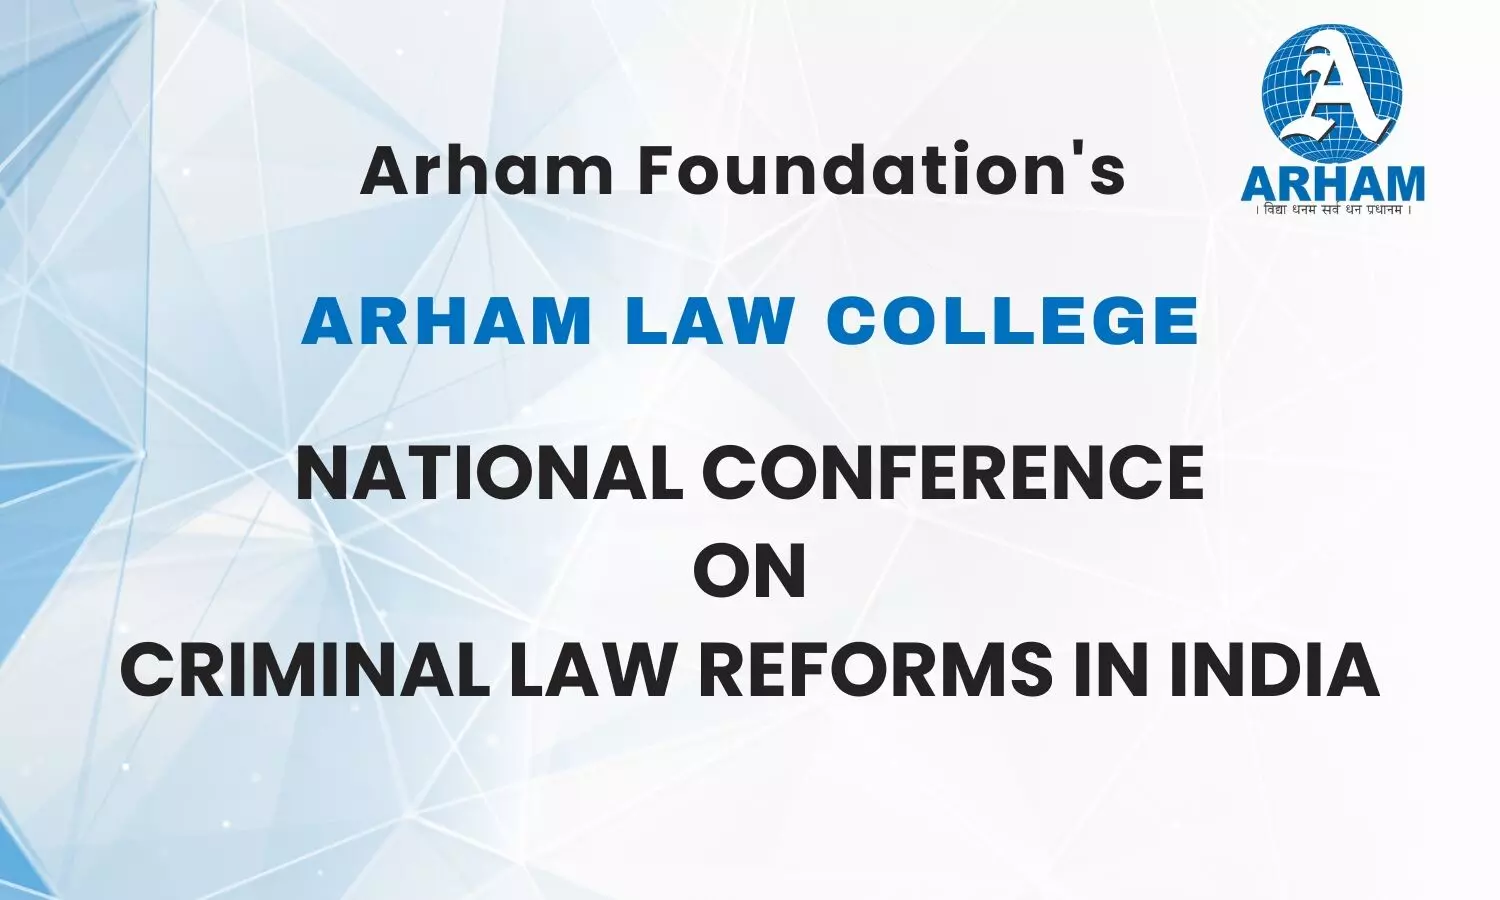 Conference on Criminal Law Reforms in India | Arham Law College